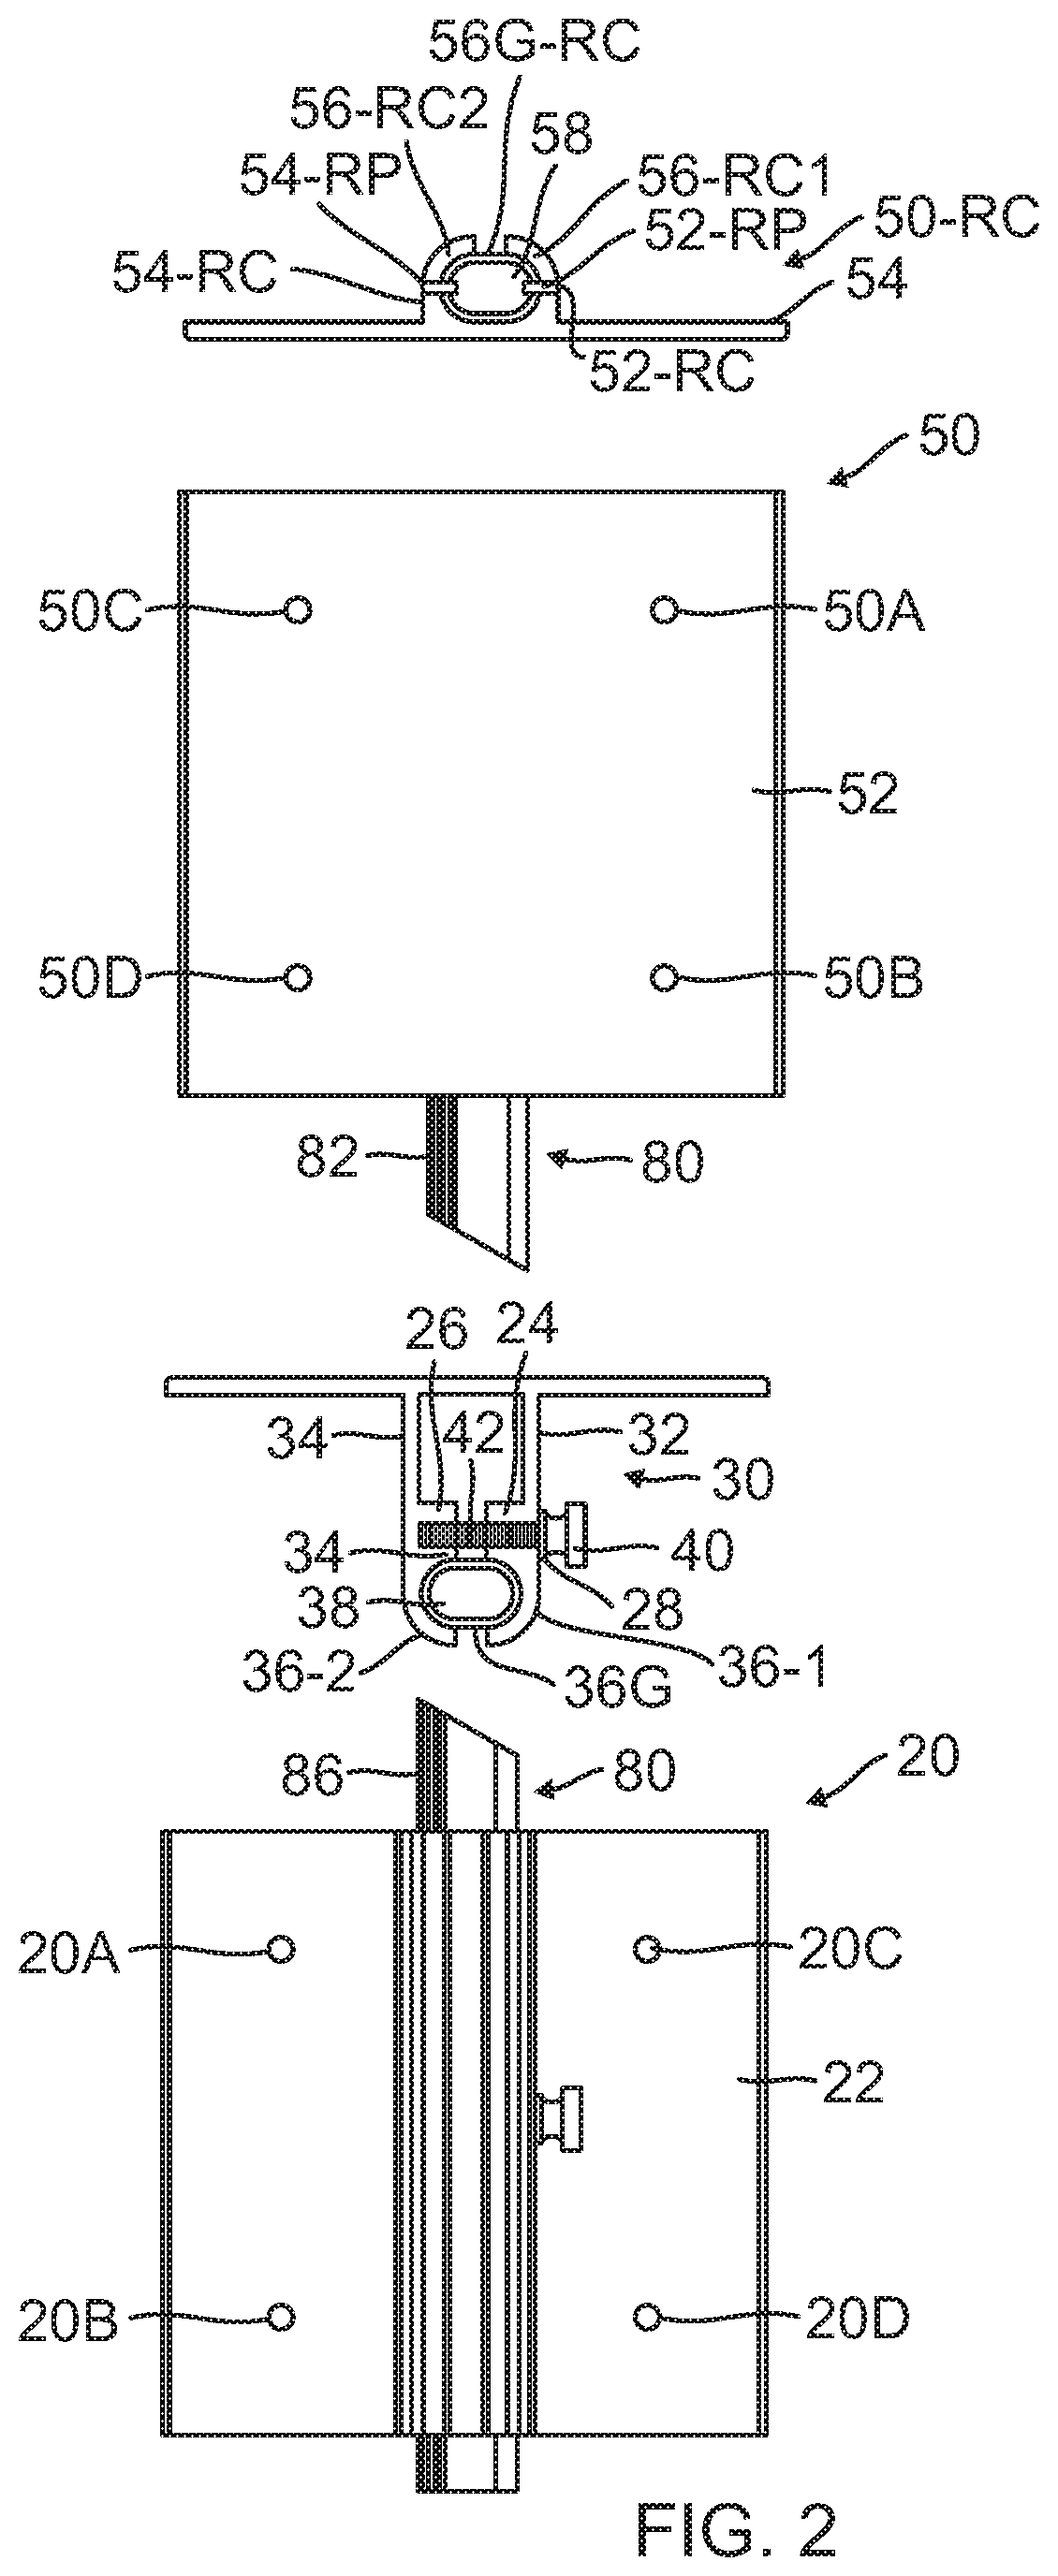 Apparatus to enable a handicapped person to install and service a device adjacent a ceiling